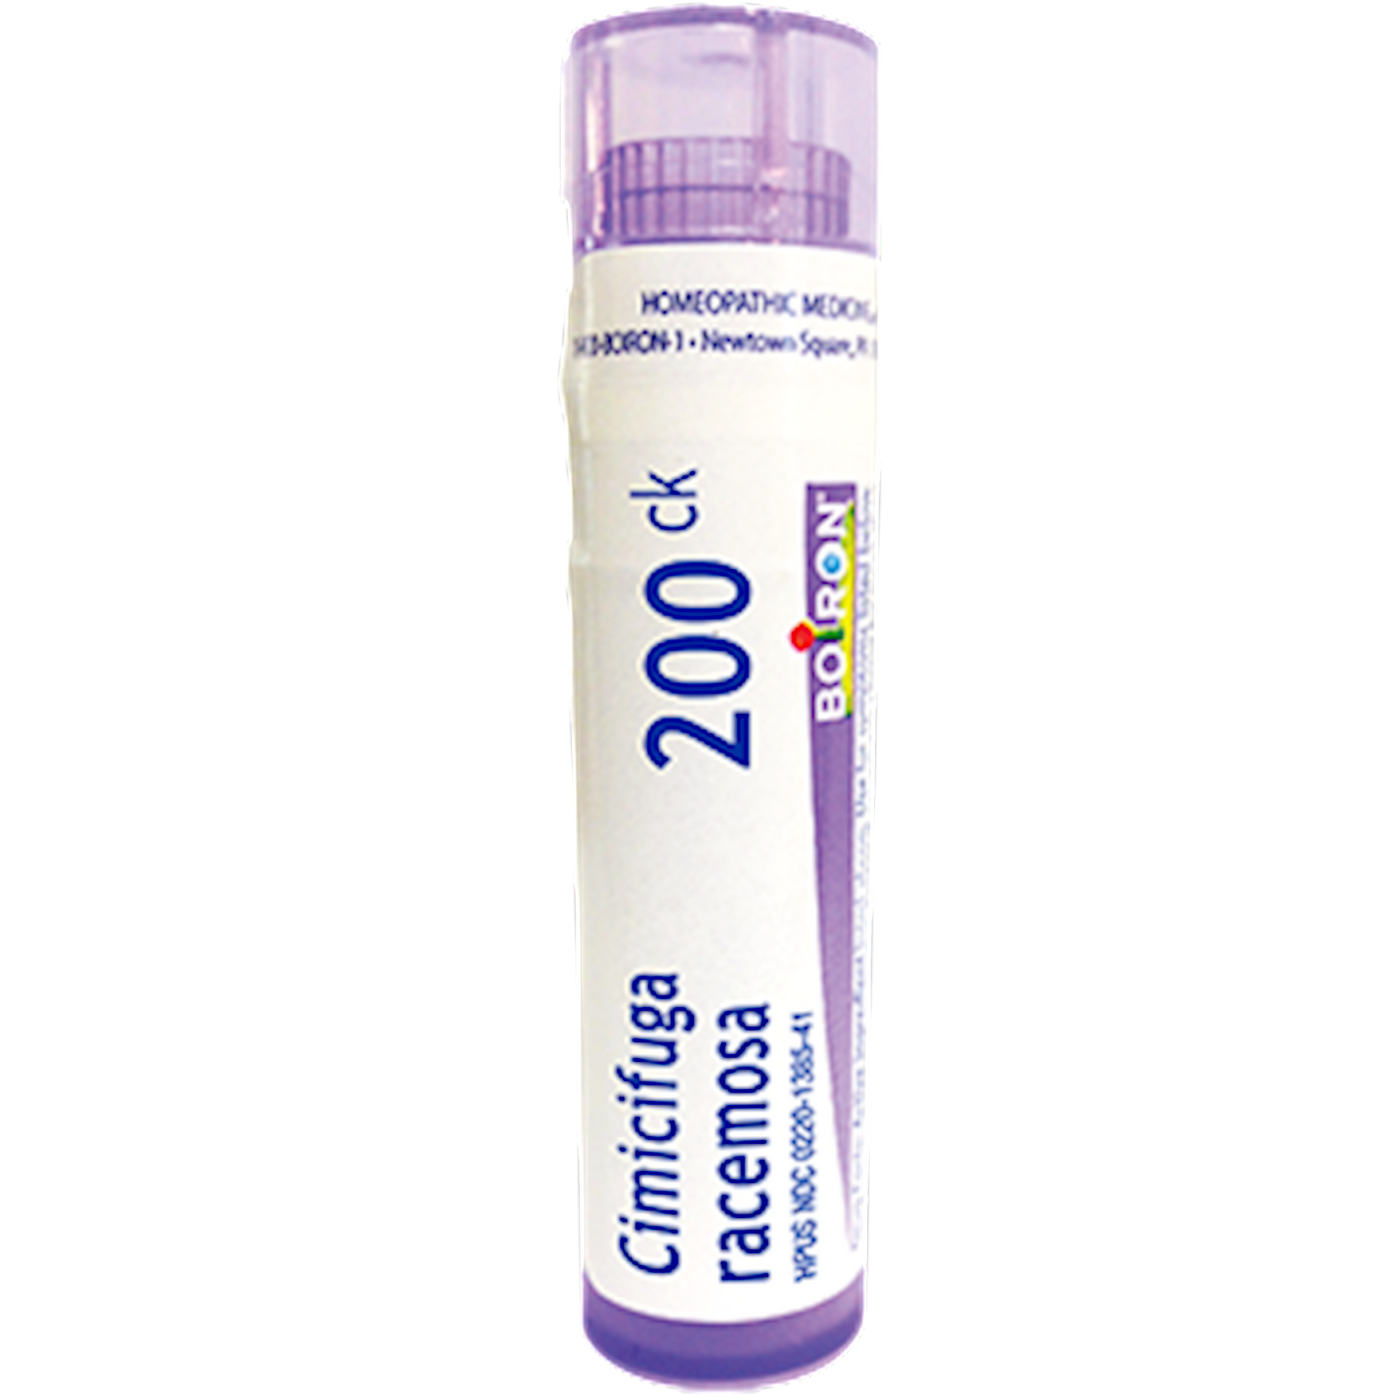 Cimicifuga racemosa 200CK 80 plts Curated Wellness